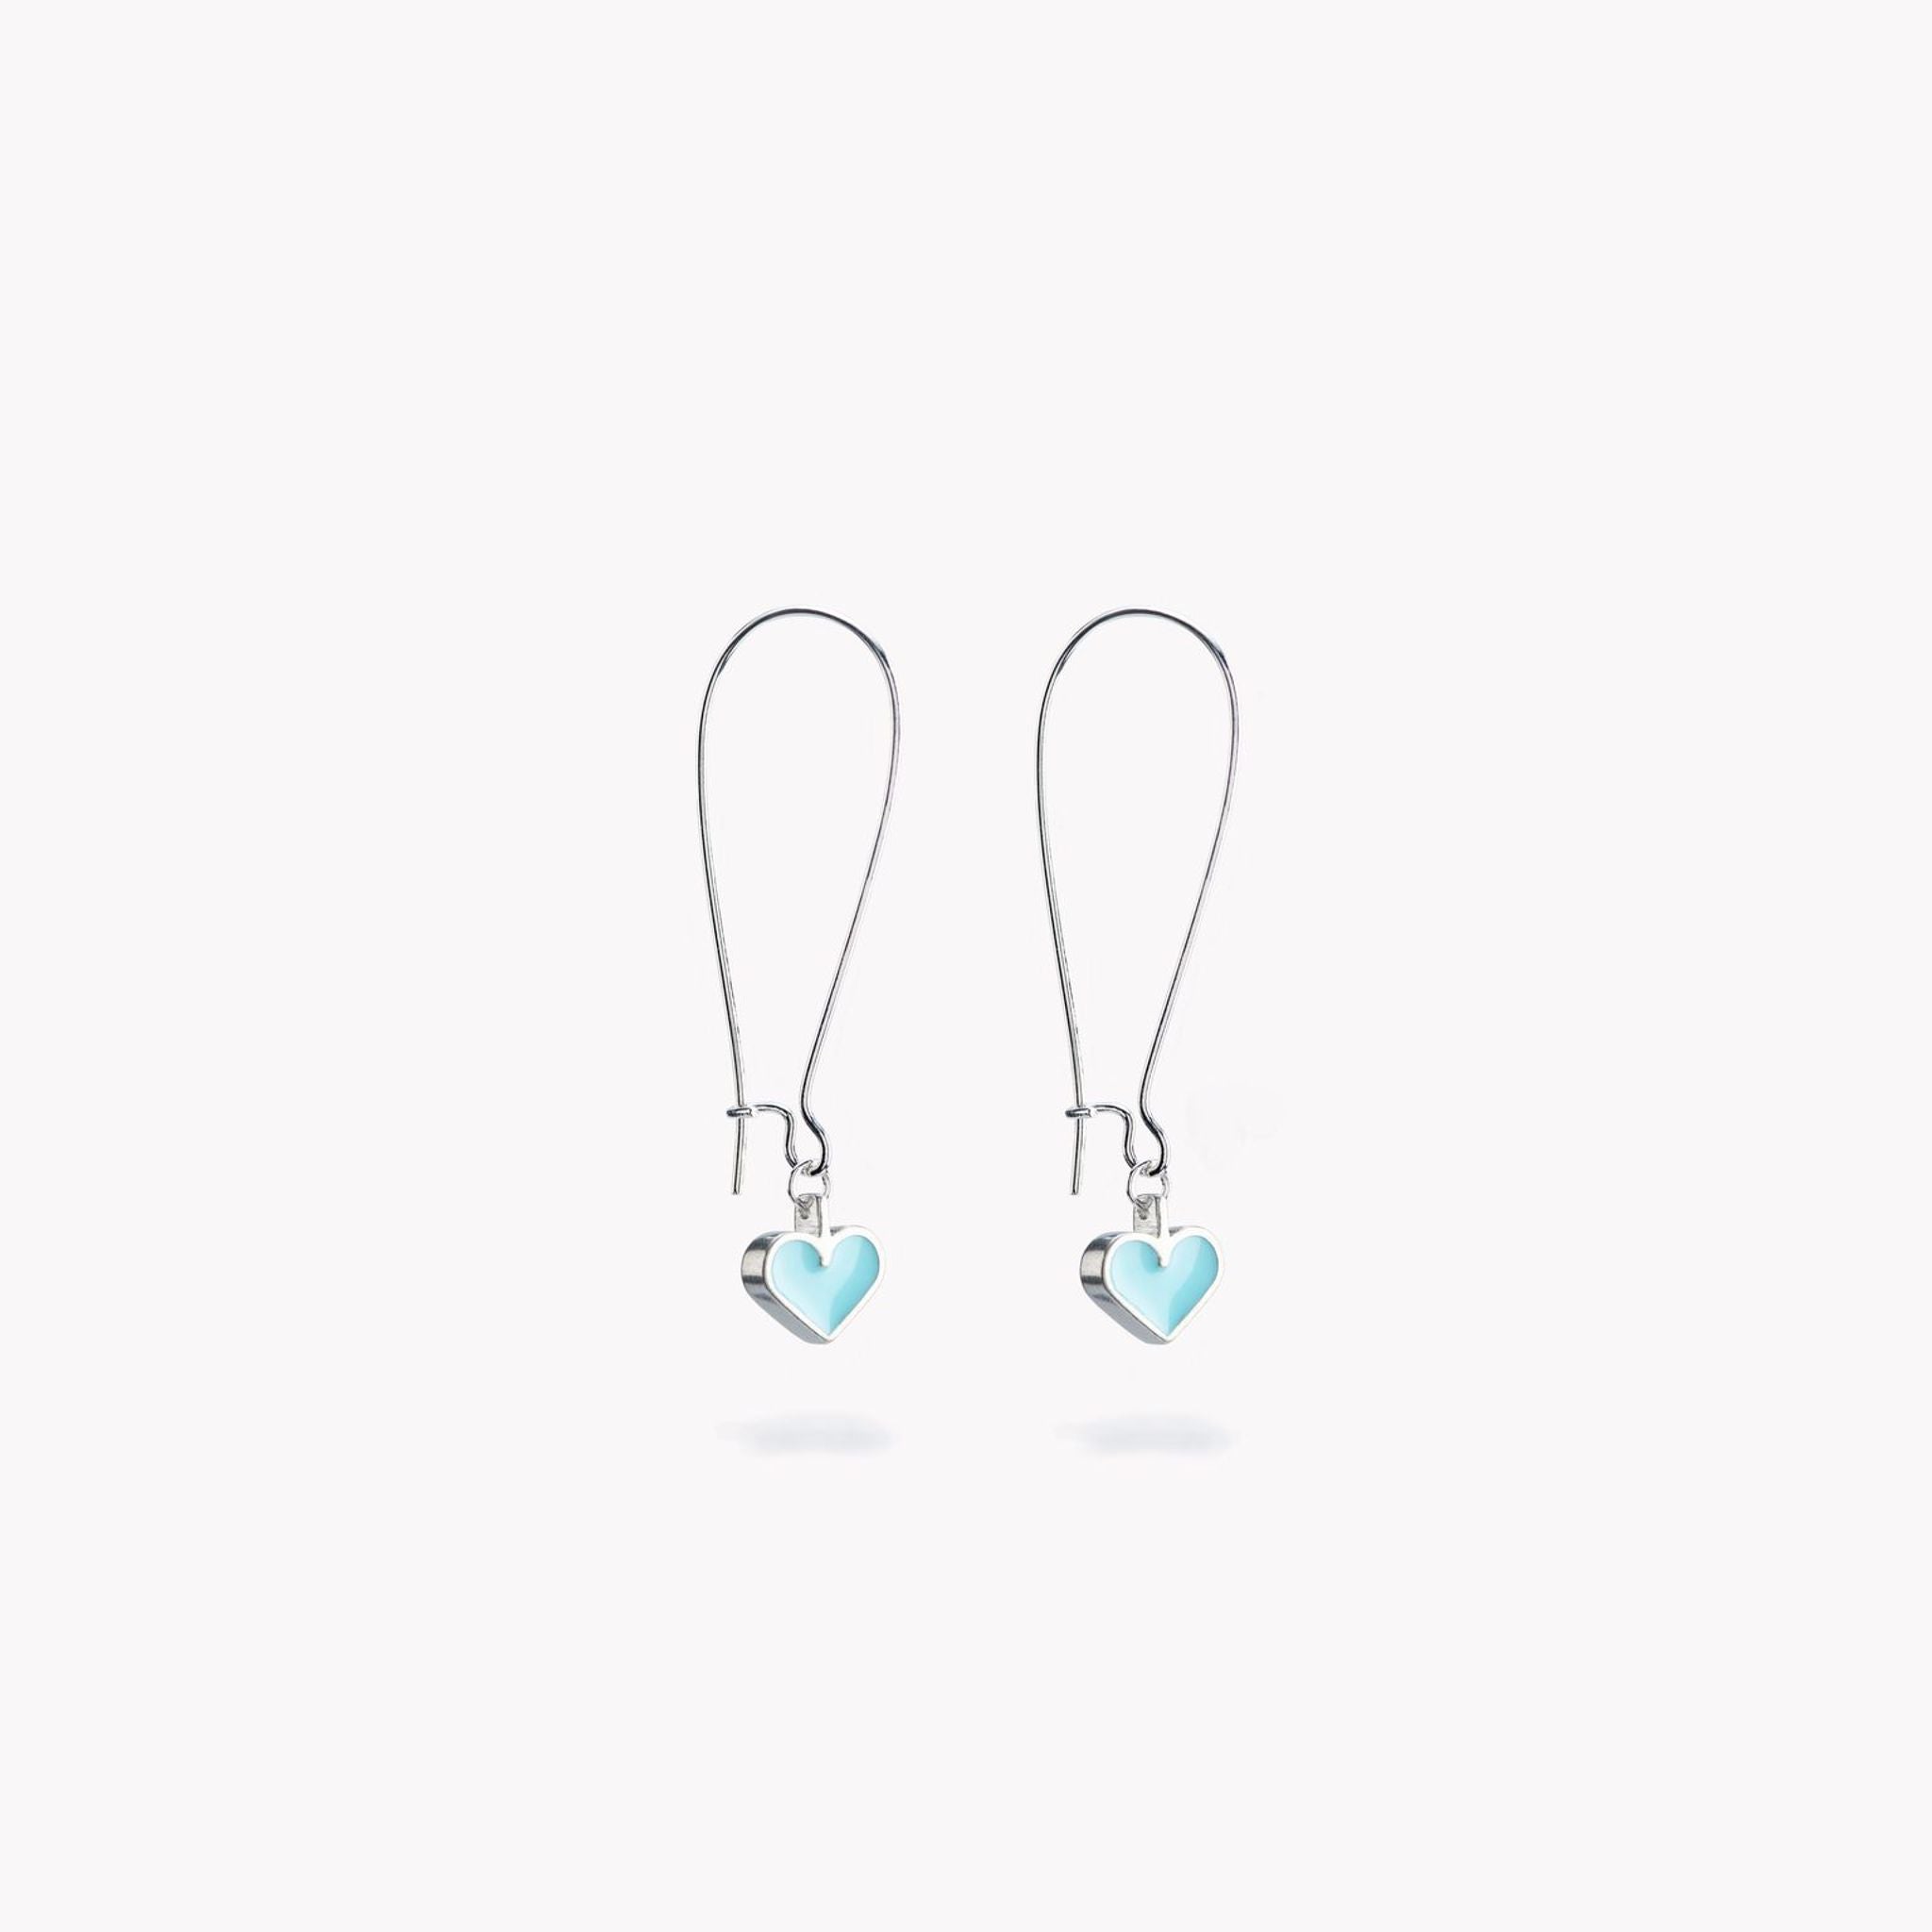 A simple pair of turquoise heart shaped drop earrings.